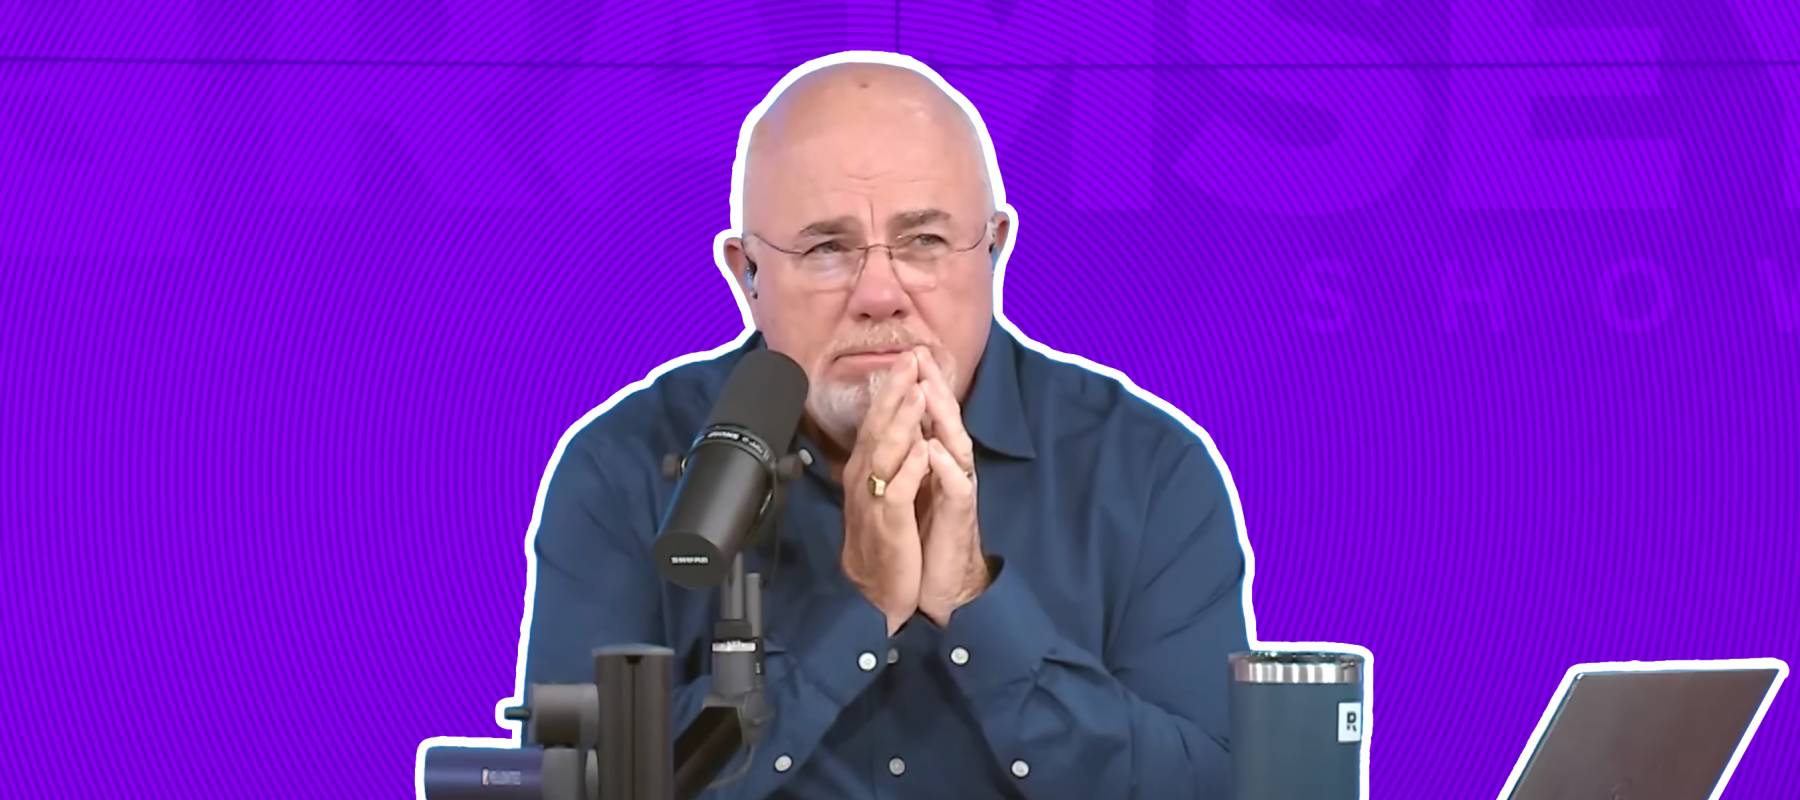 Dave Ramsey speaks on an episode of the Ramsey Show.